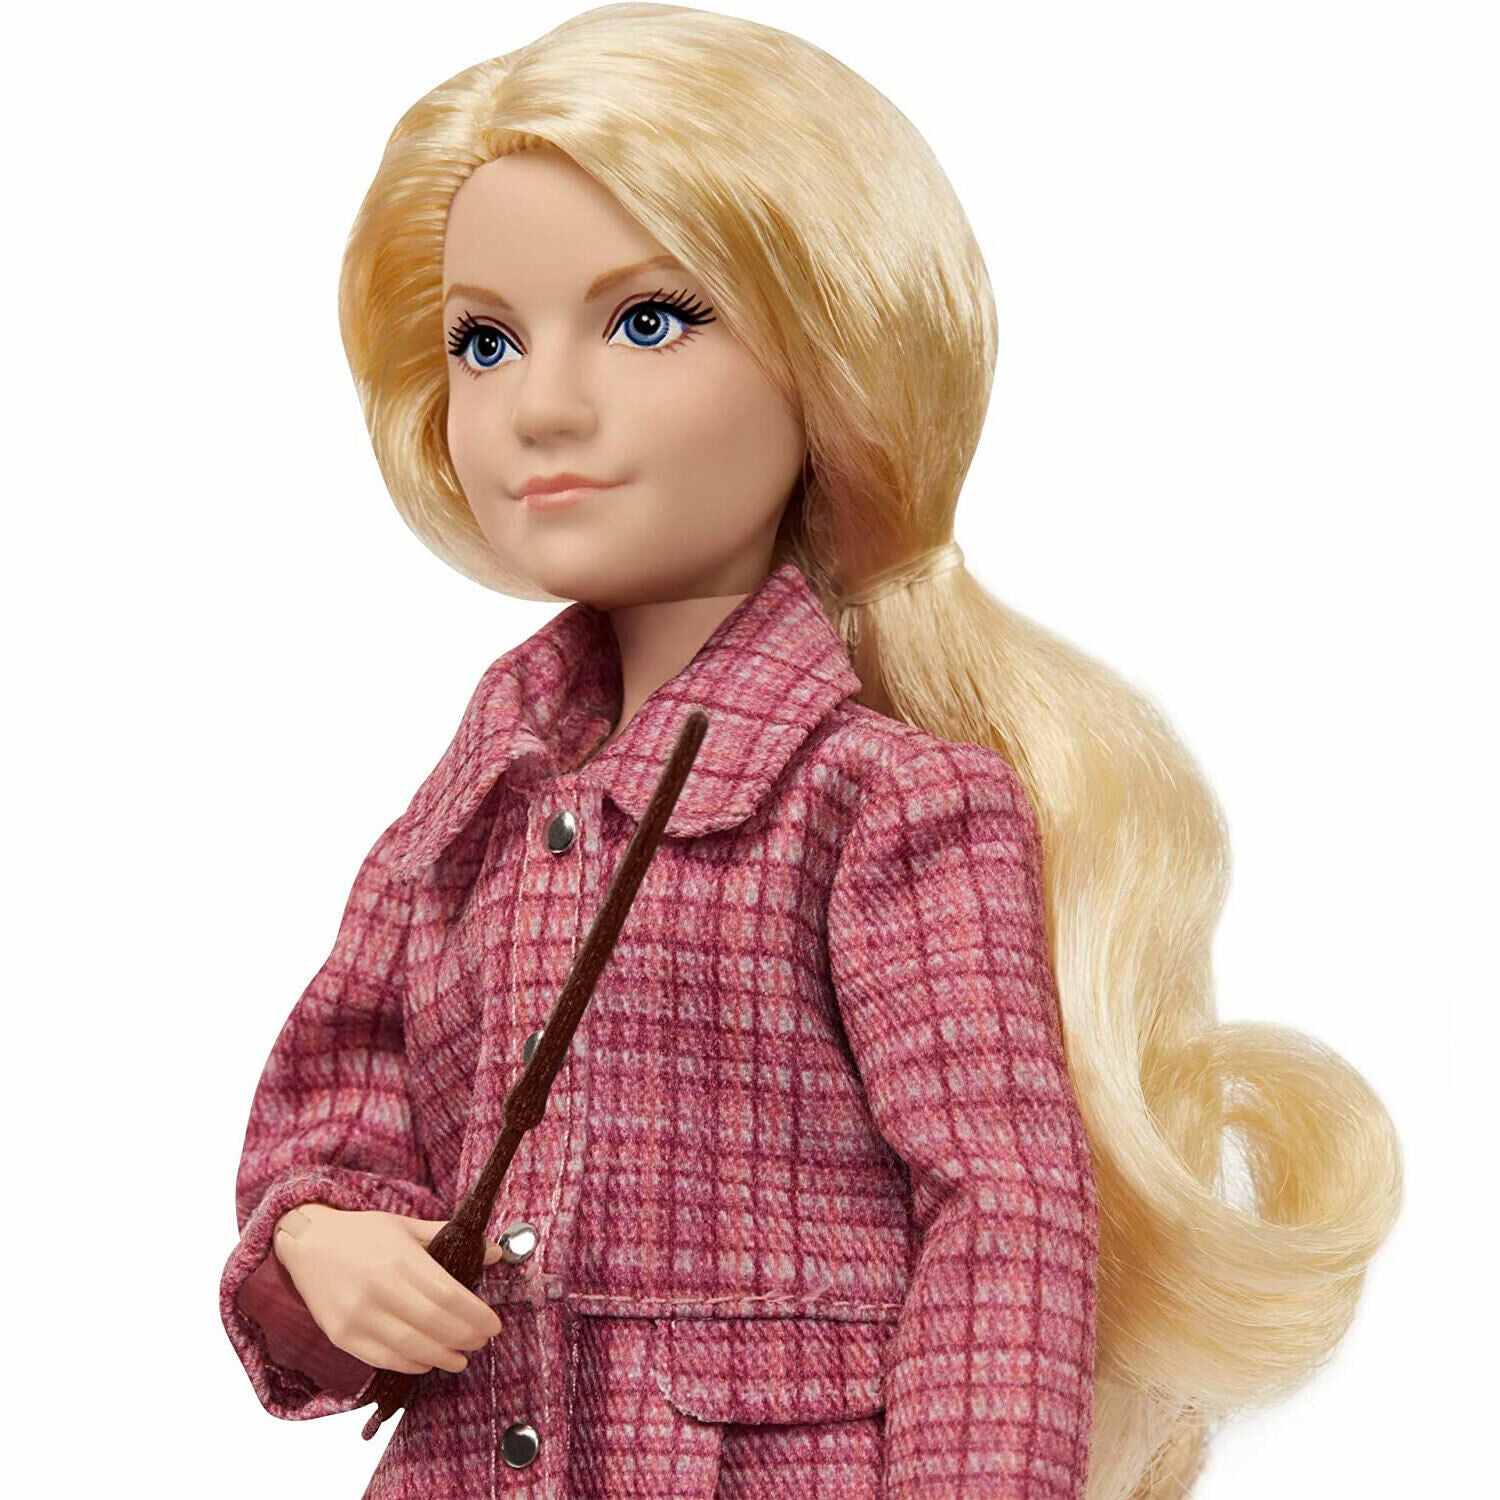 New Harry Potter Luna Lovegood Doll - Wizarding World Collectible